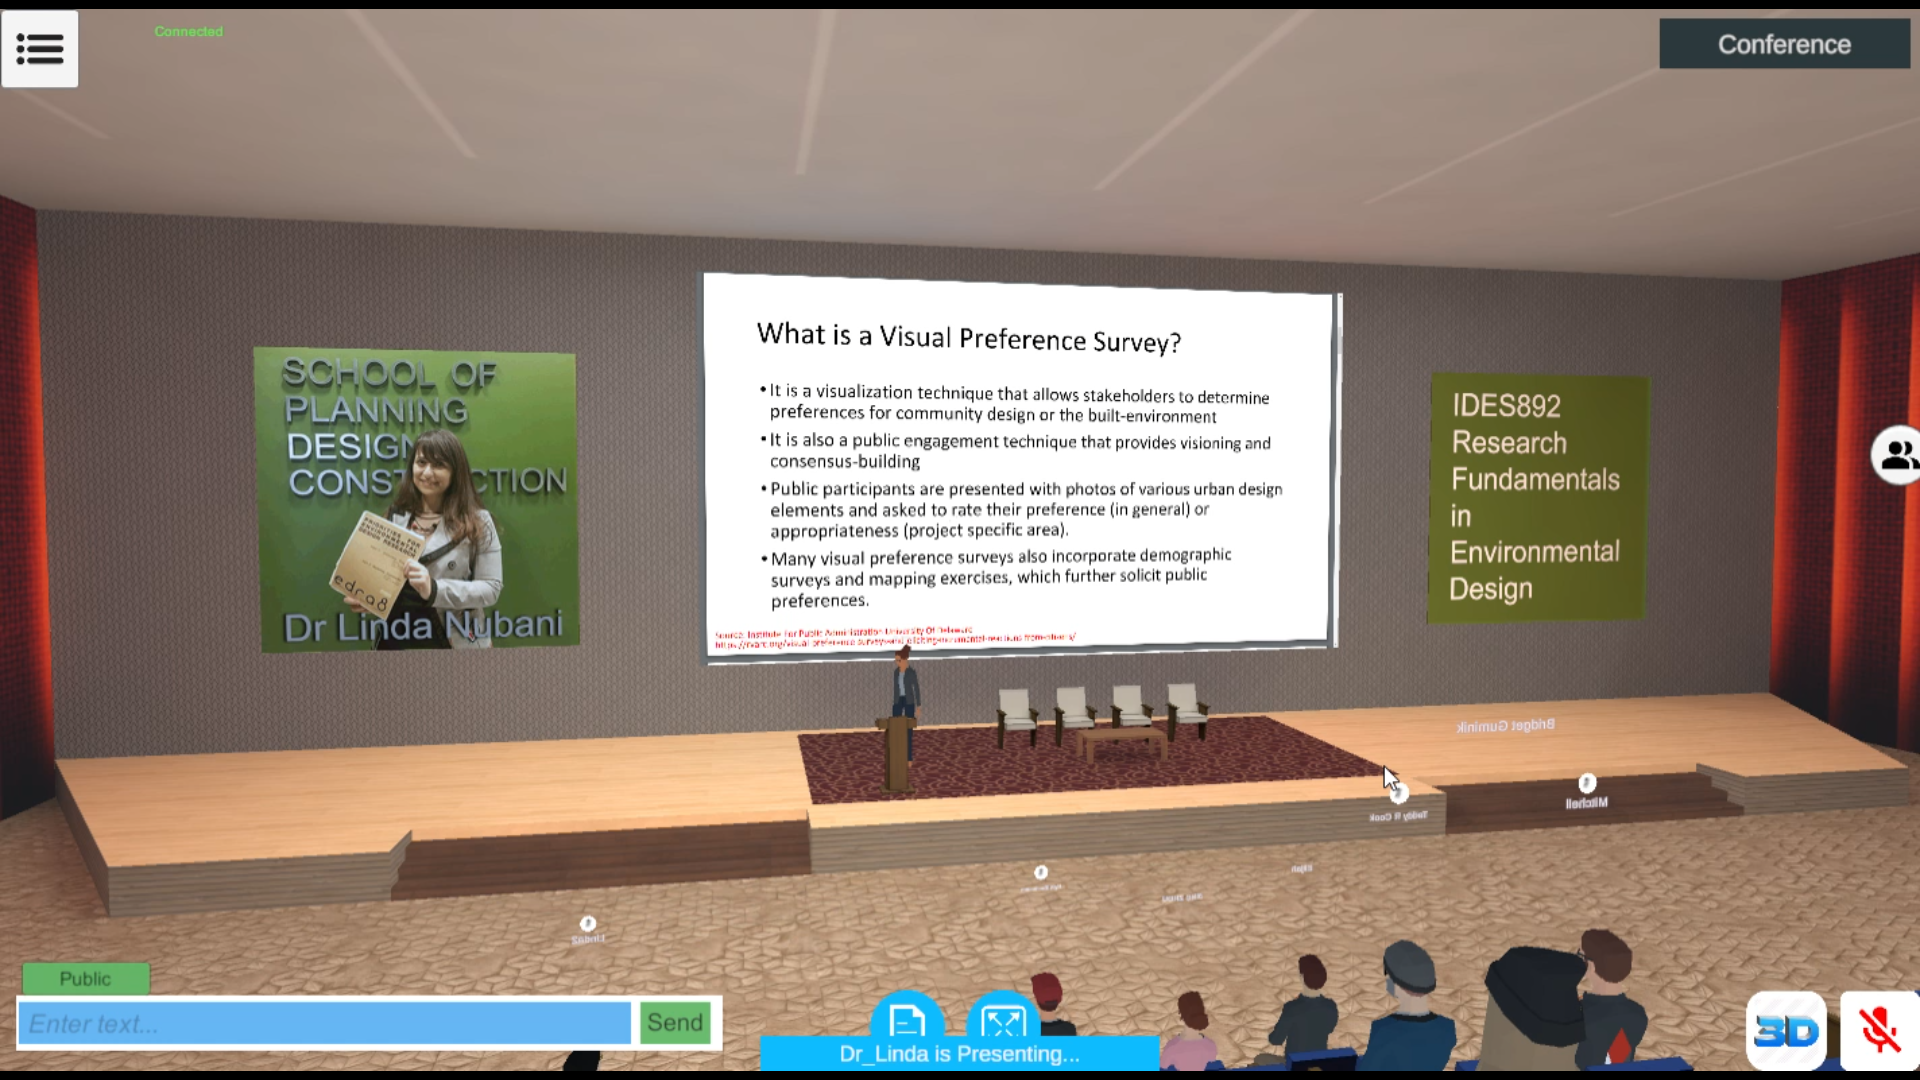 Lecture in an auditorium inside a 3D virtual reality space.